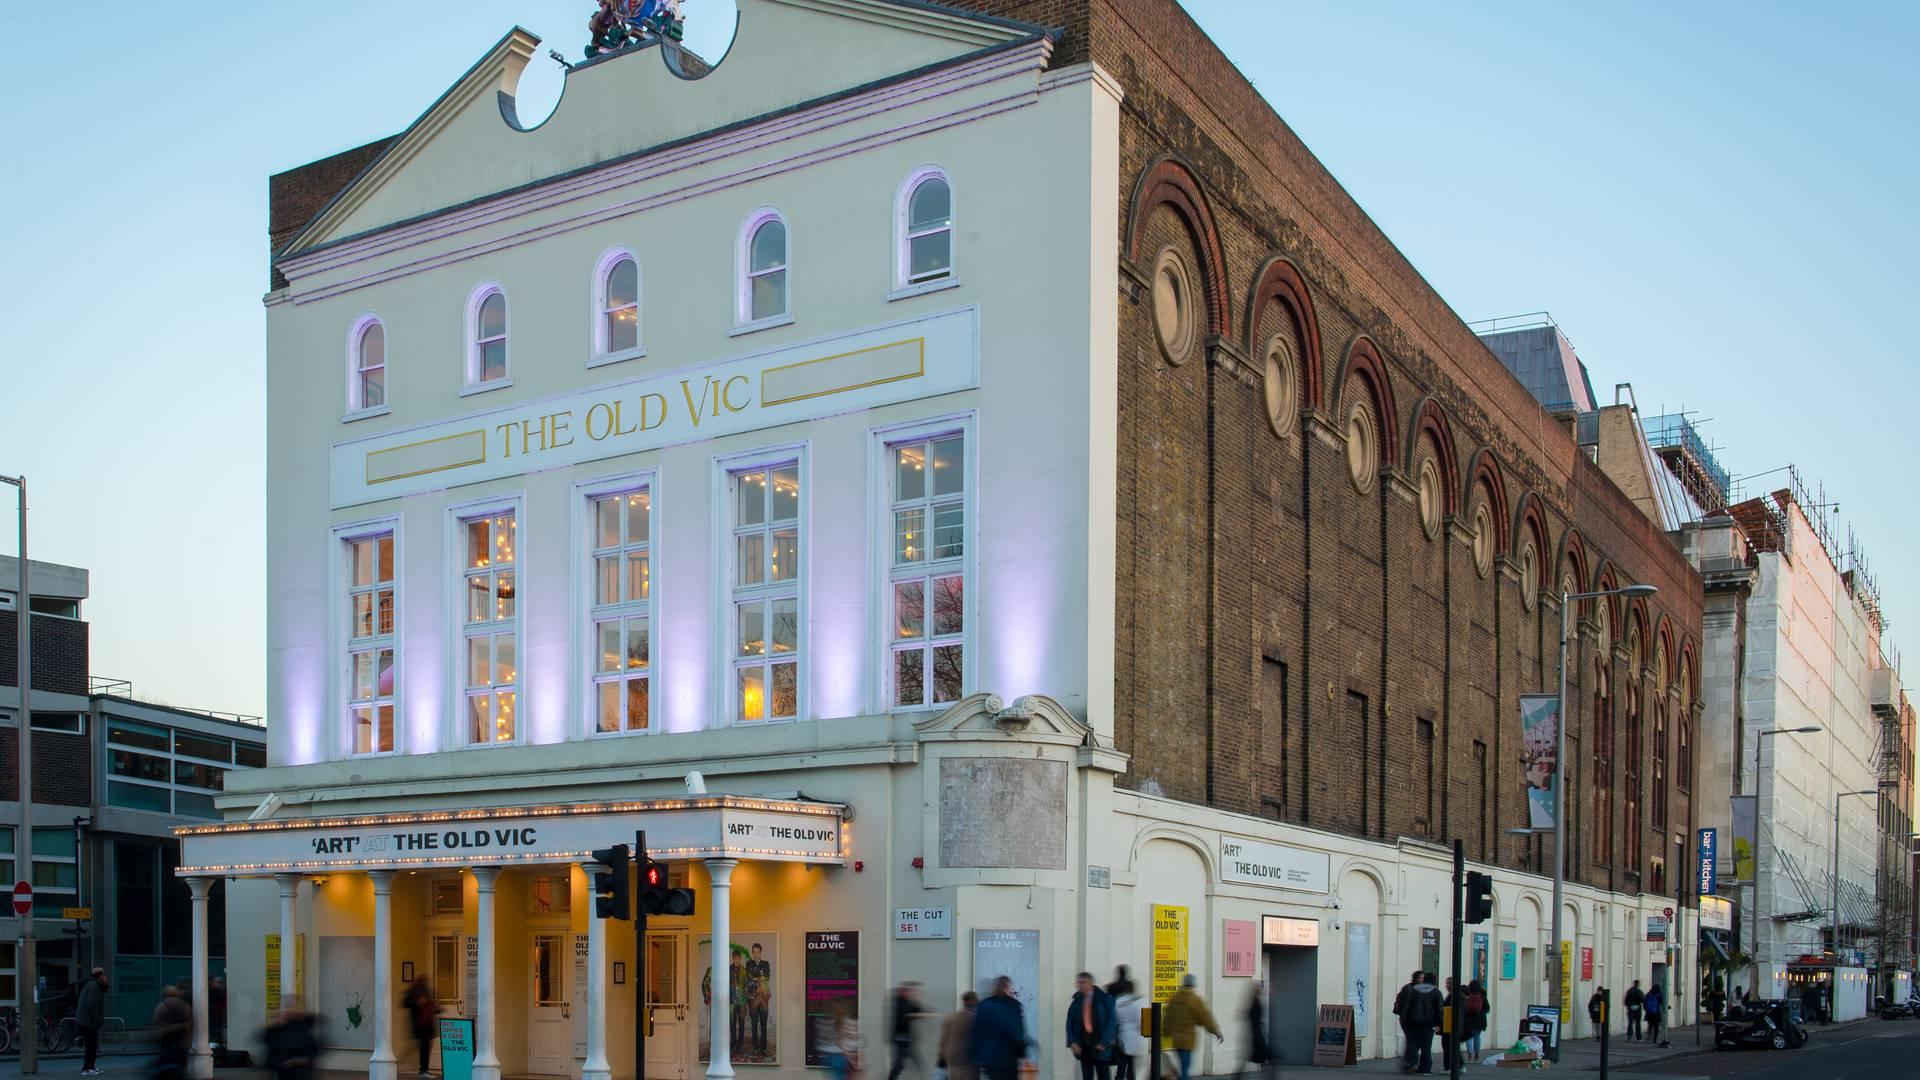 The Old Vic photo